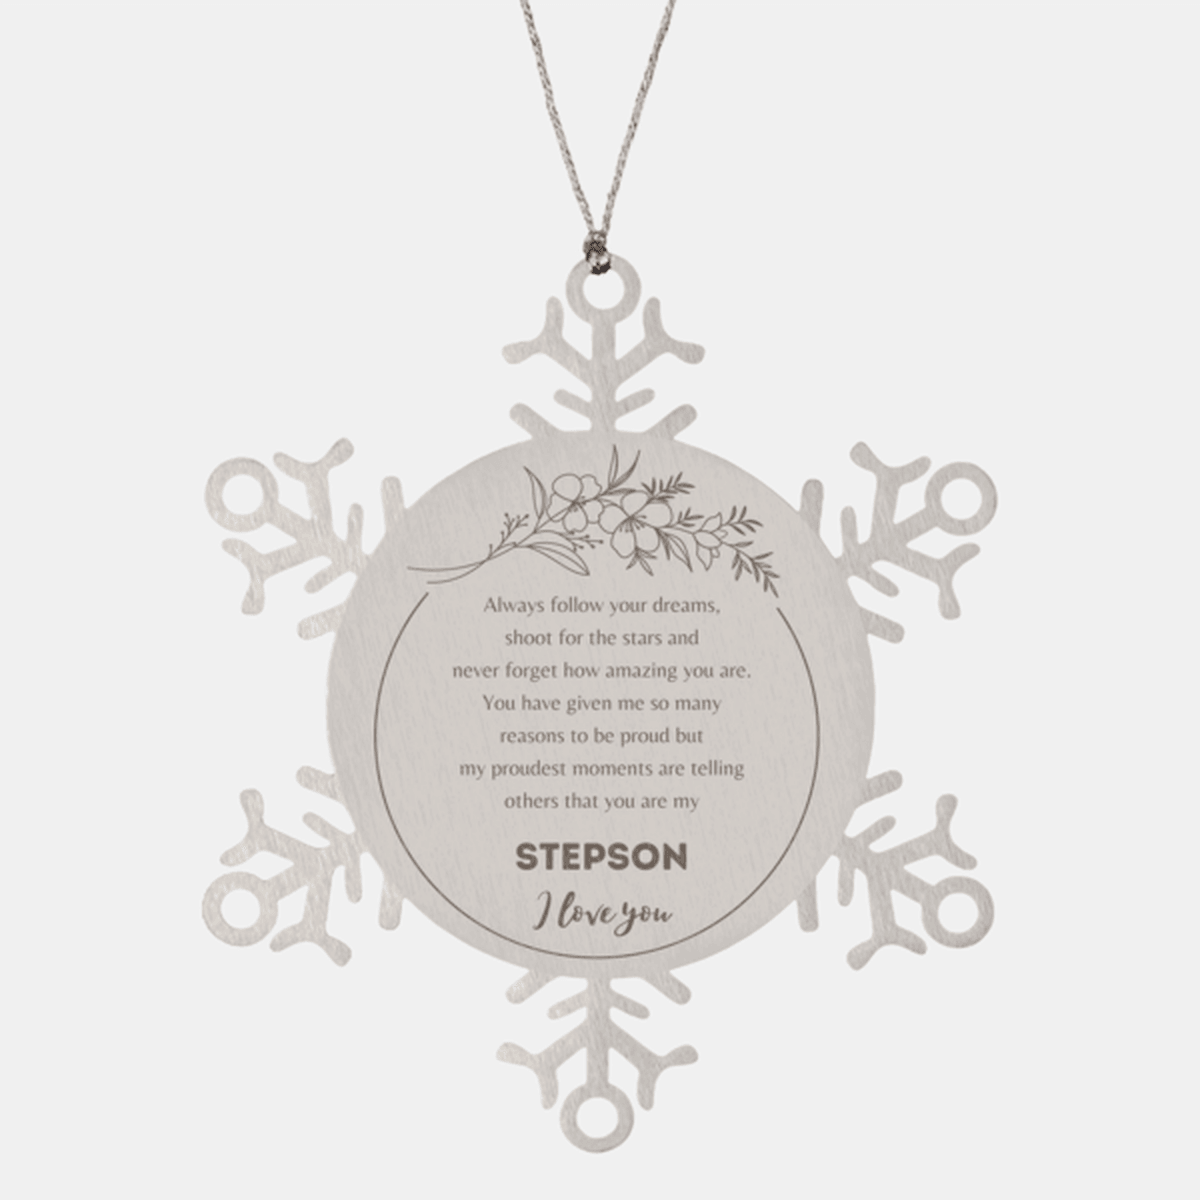 Snowflake Ornament for Stepson Present, Stepson Always follow your dreams, never forget how amazing you are, Stepson Christmas Gifts Decorations for Girls Boys Teen Men Women - Mallard Moon Gift Shop